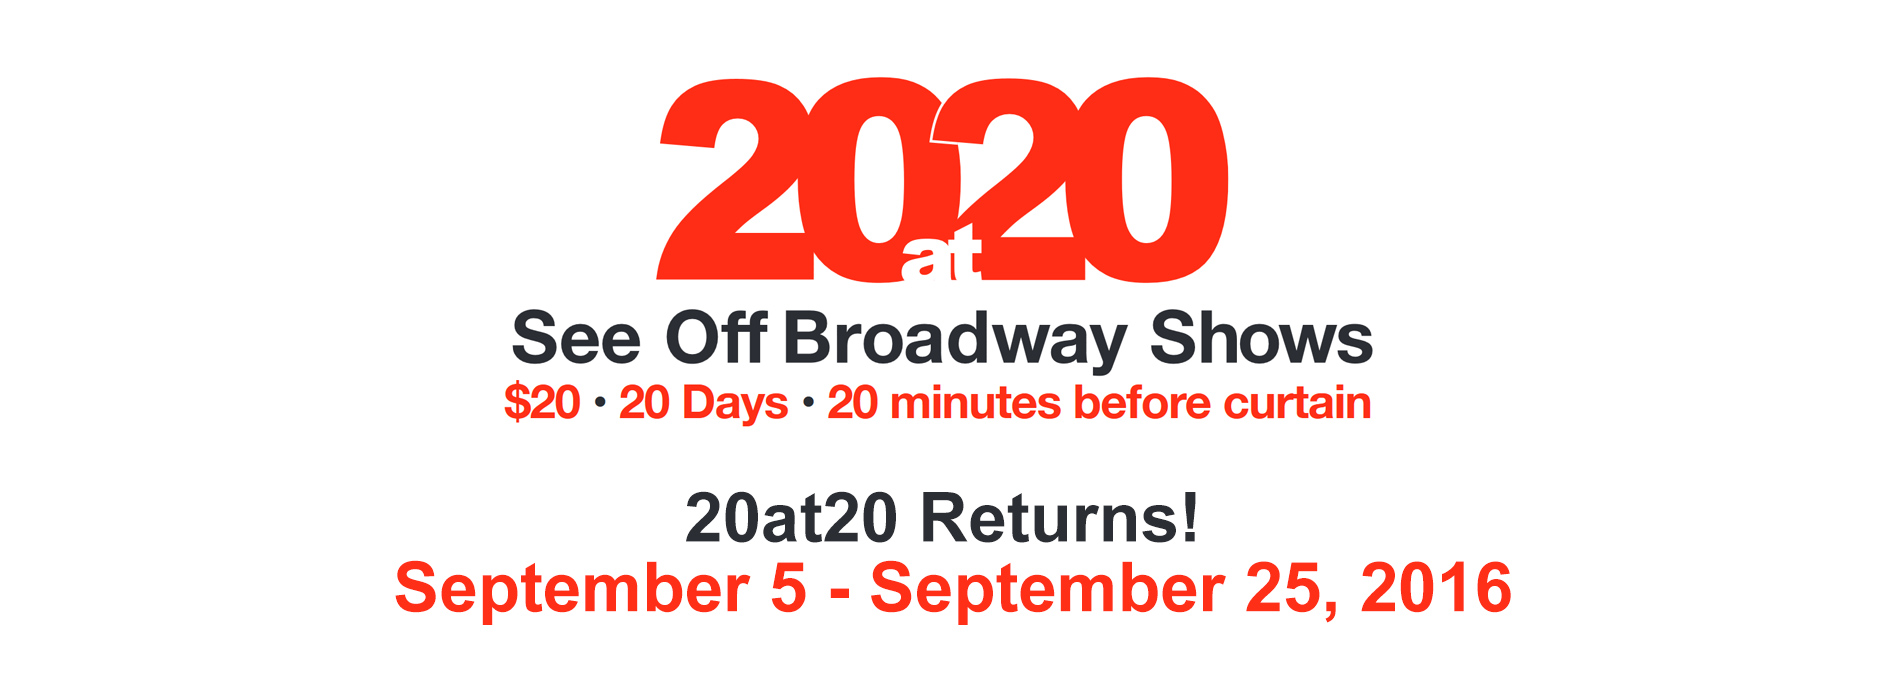 20at20 Starts Today! See an Off Broadway Show for $20